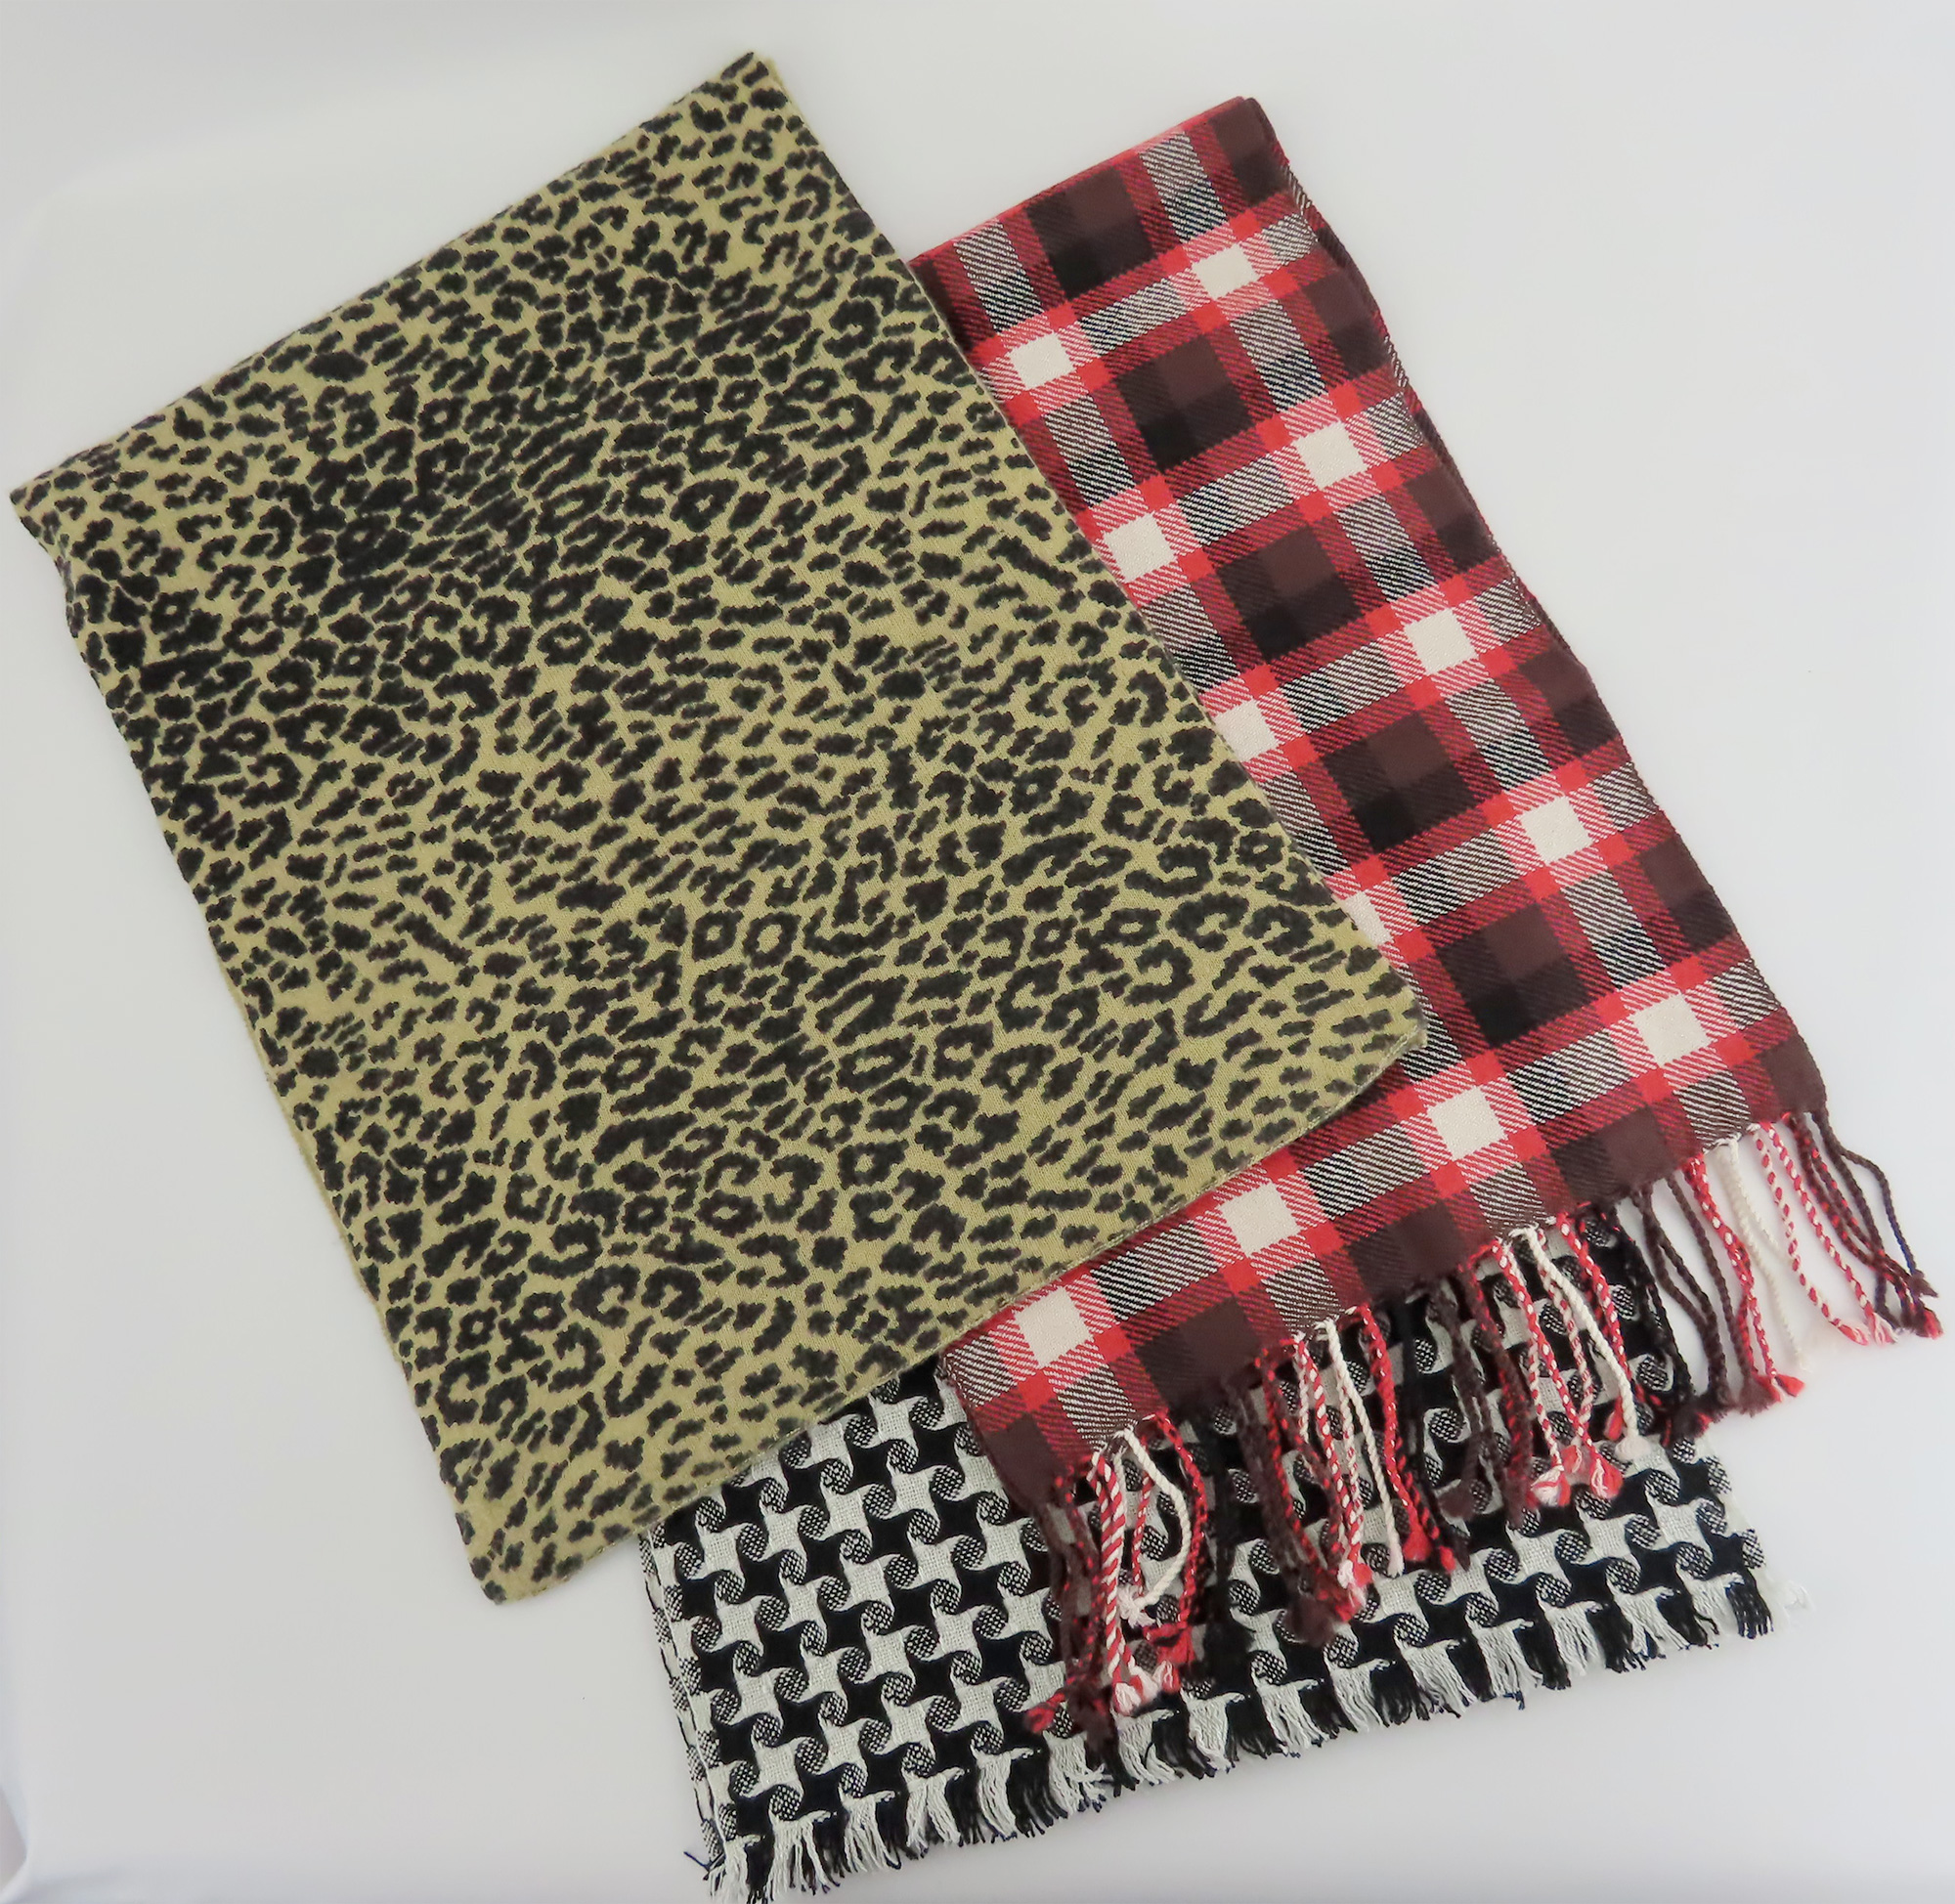 Houndstooth, Plaid and Animal Print Scarves are Top 10 Holiday Gifts for 2019